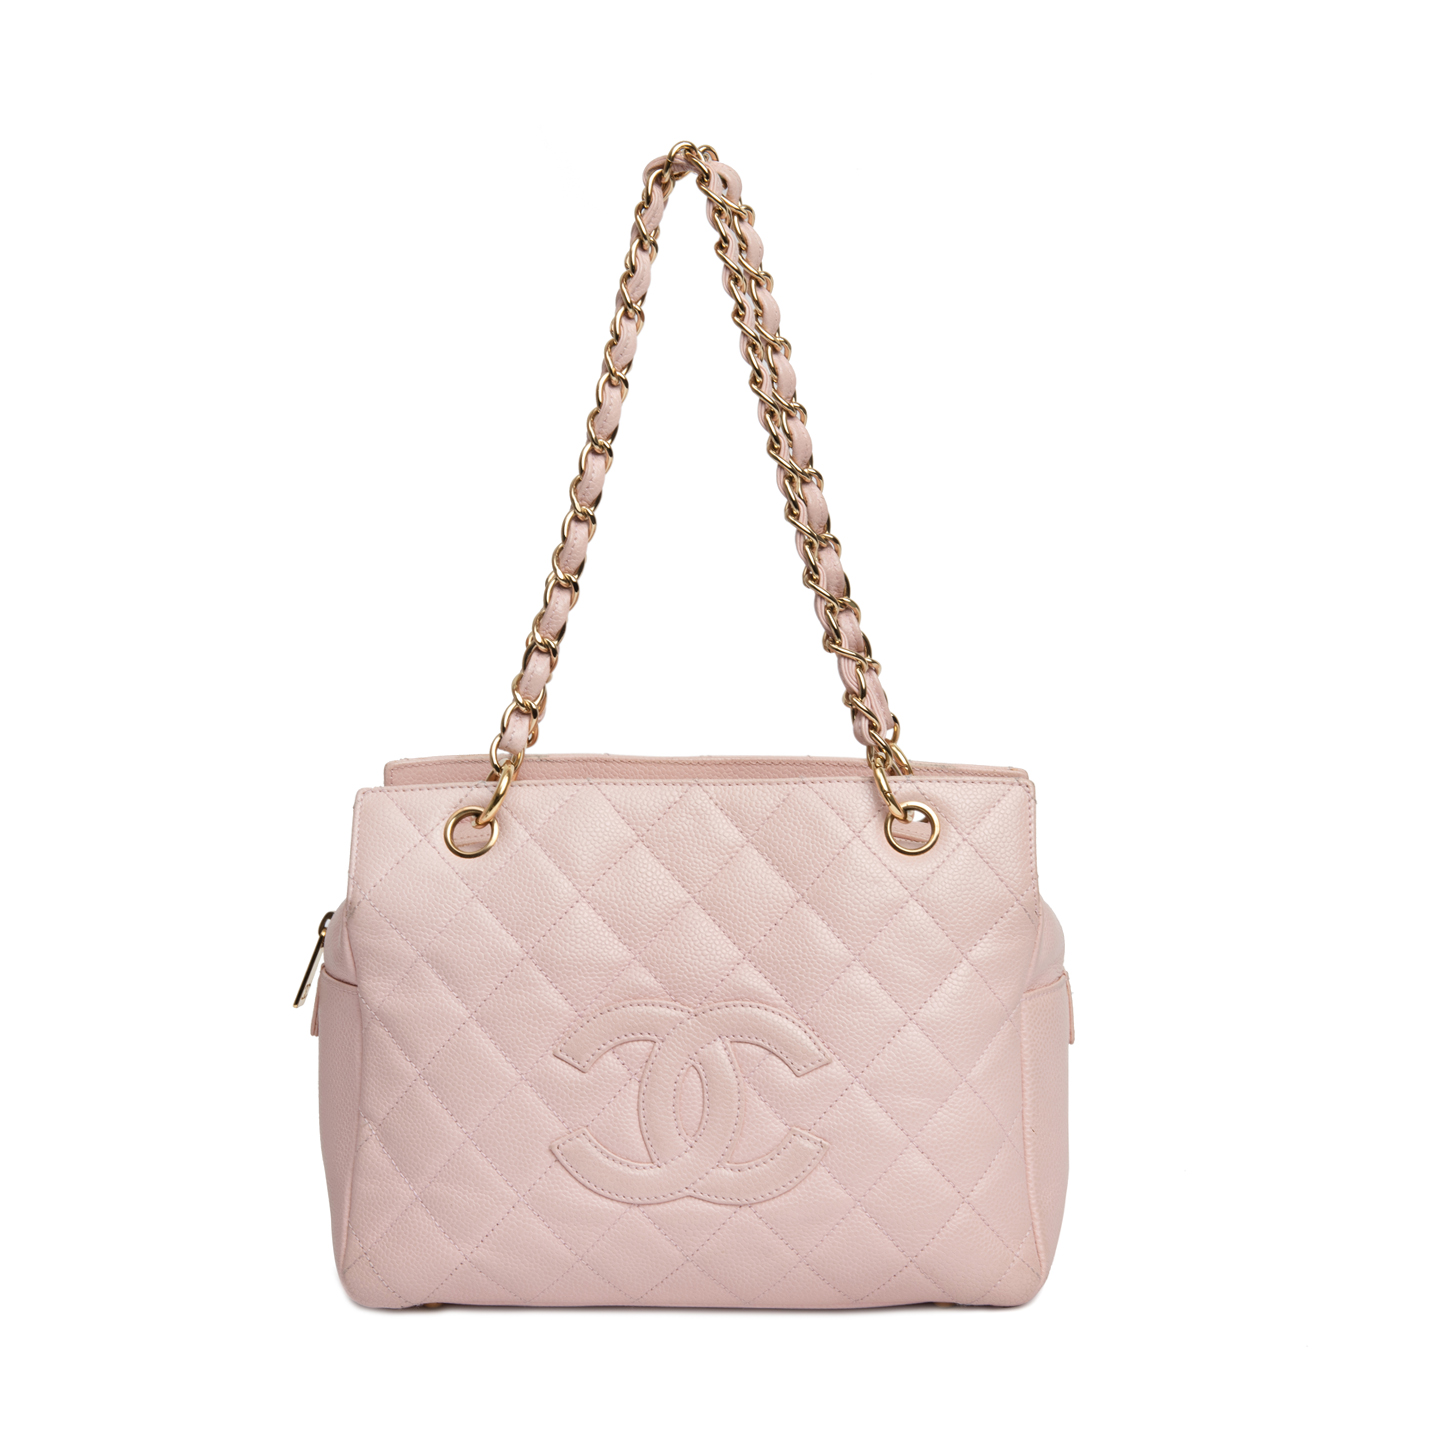 Chanel Pink Quilted Caviar Leather Petite Timeless Shopping Tote